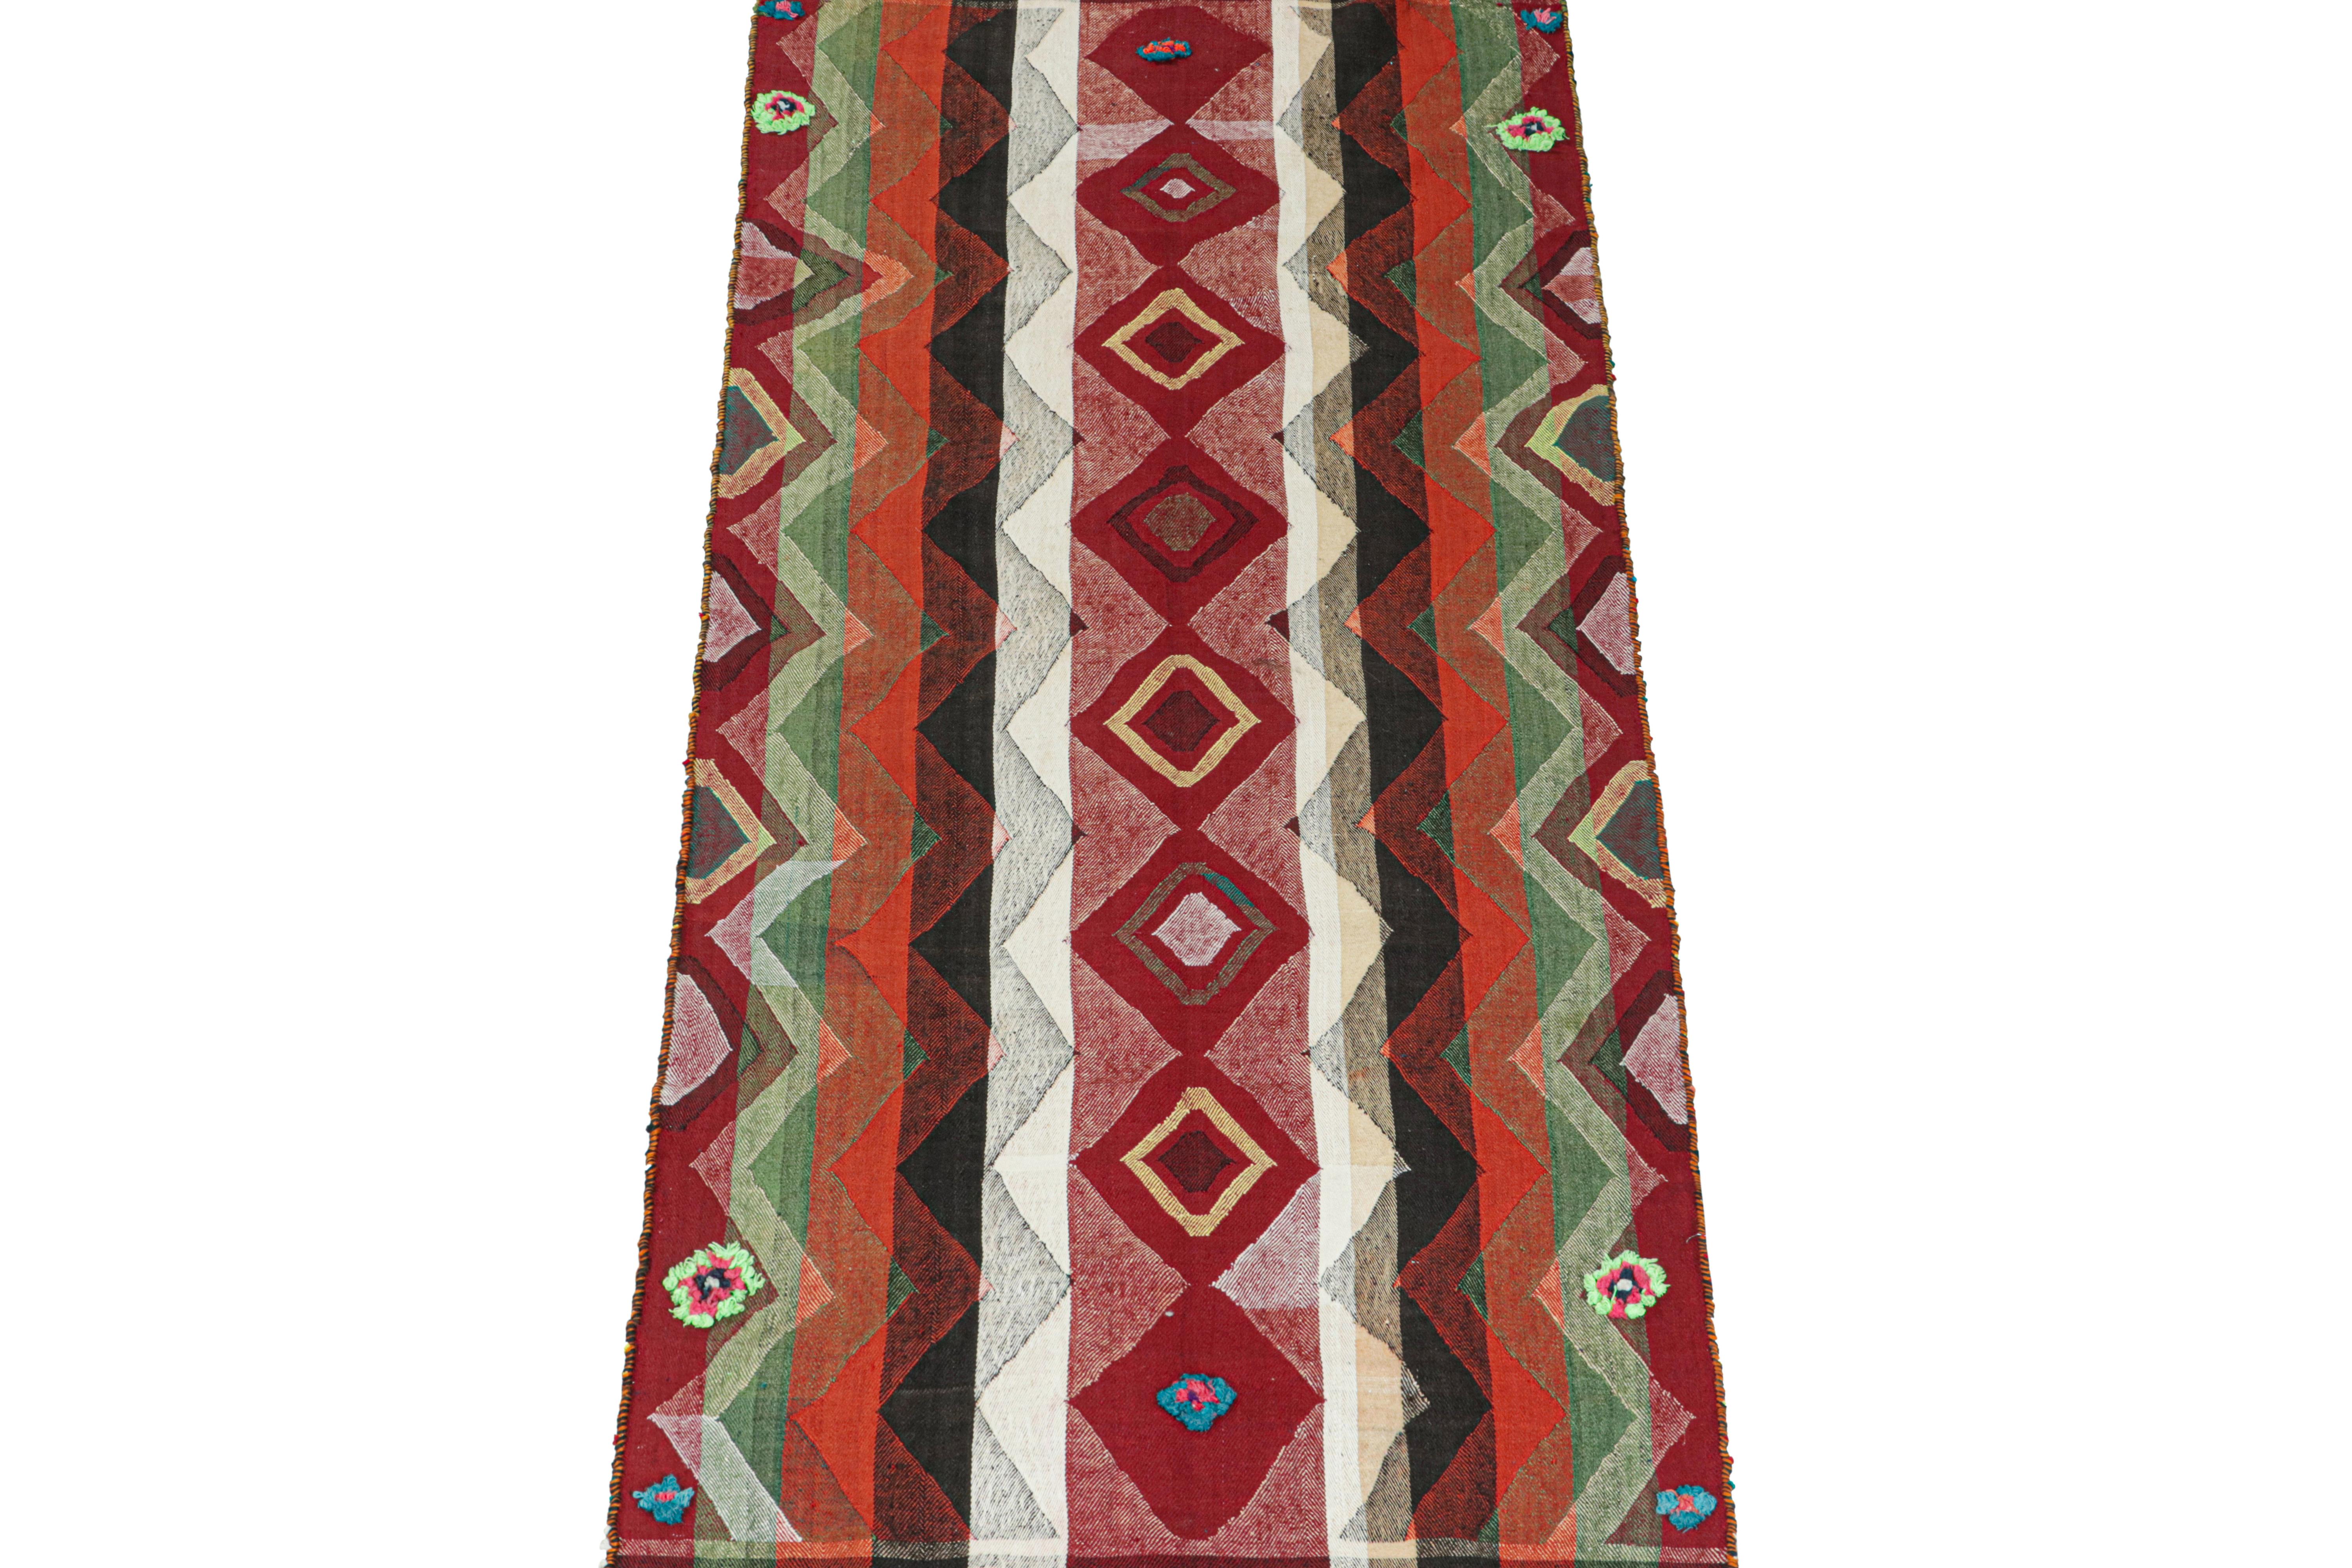 This vintage 3x8 Persian kilim runner is handwoven in wool, and originates circa 1950-1960.

Its design is a panel-weave, in which tribal weaves combine two or more flat weaves into one larger piece. This particular piece enjoys rich and vibrant